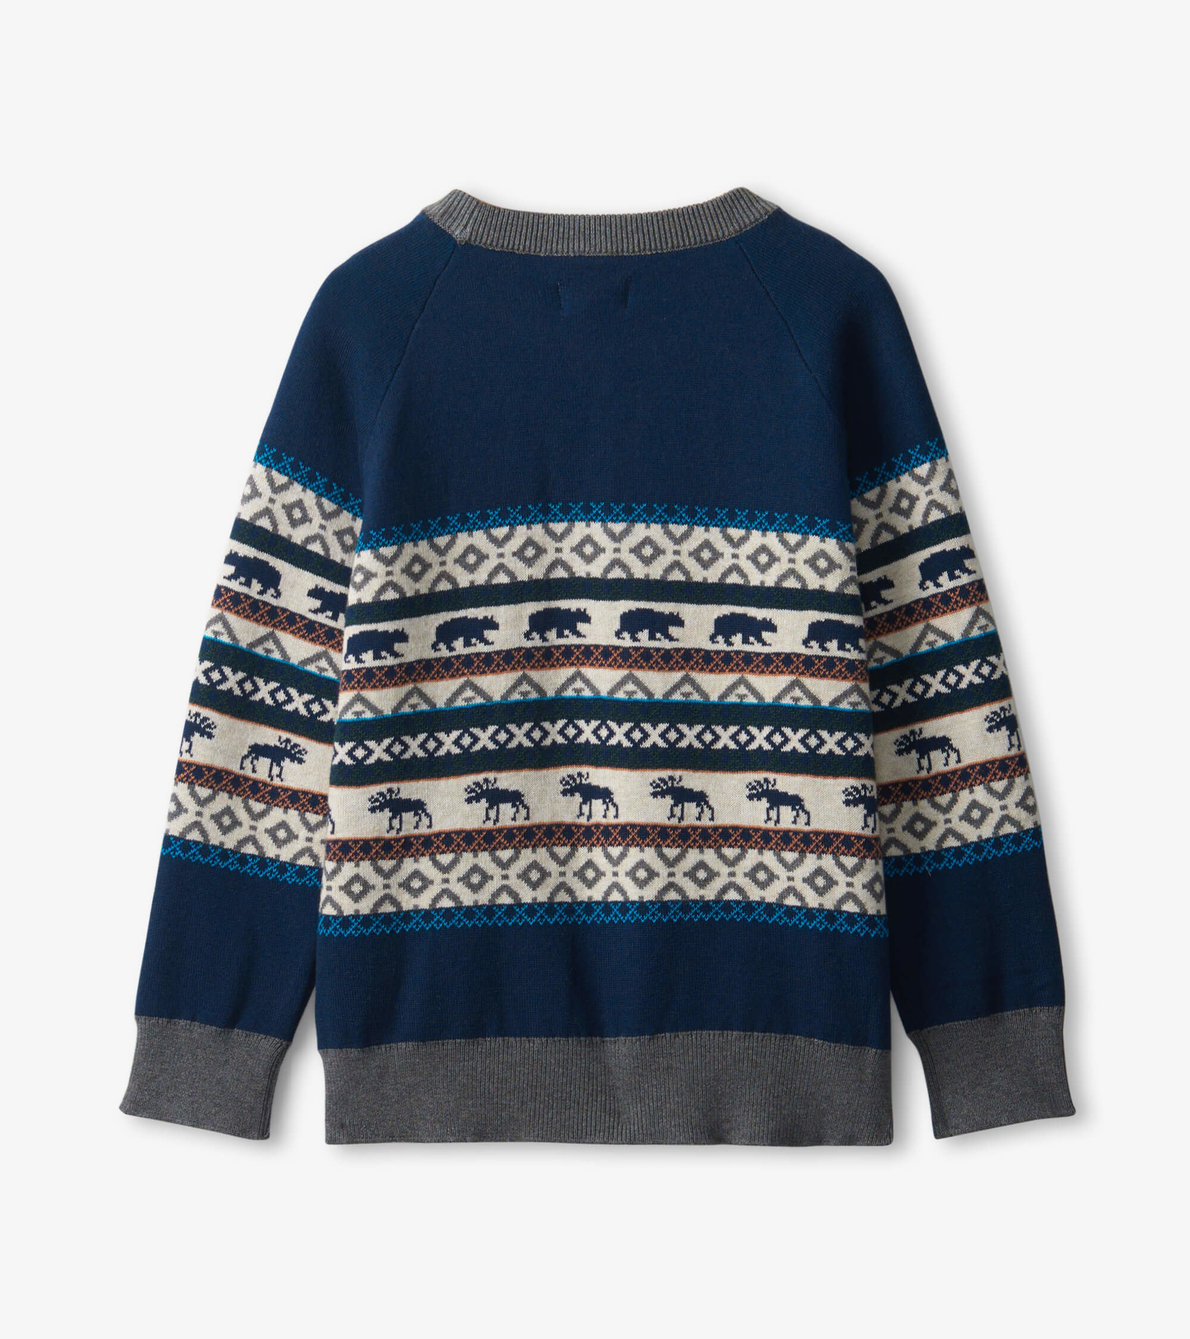 View larger image of Boys Winter Knit Crew Neck Sweater